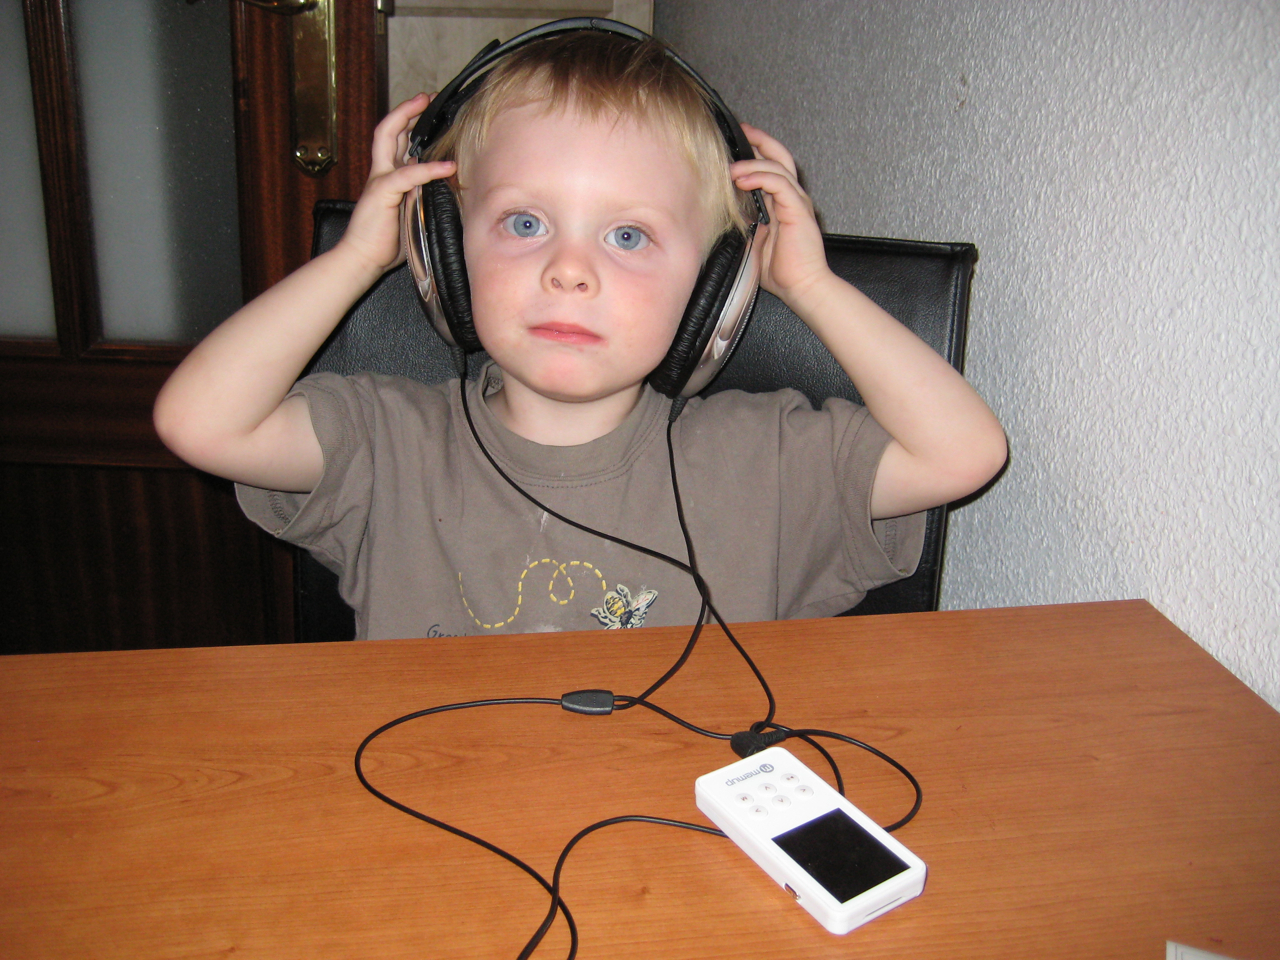 Listening to music on his music player.